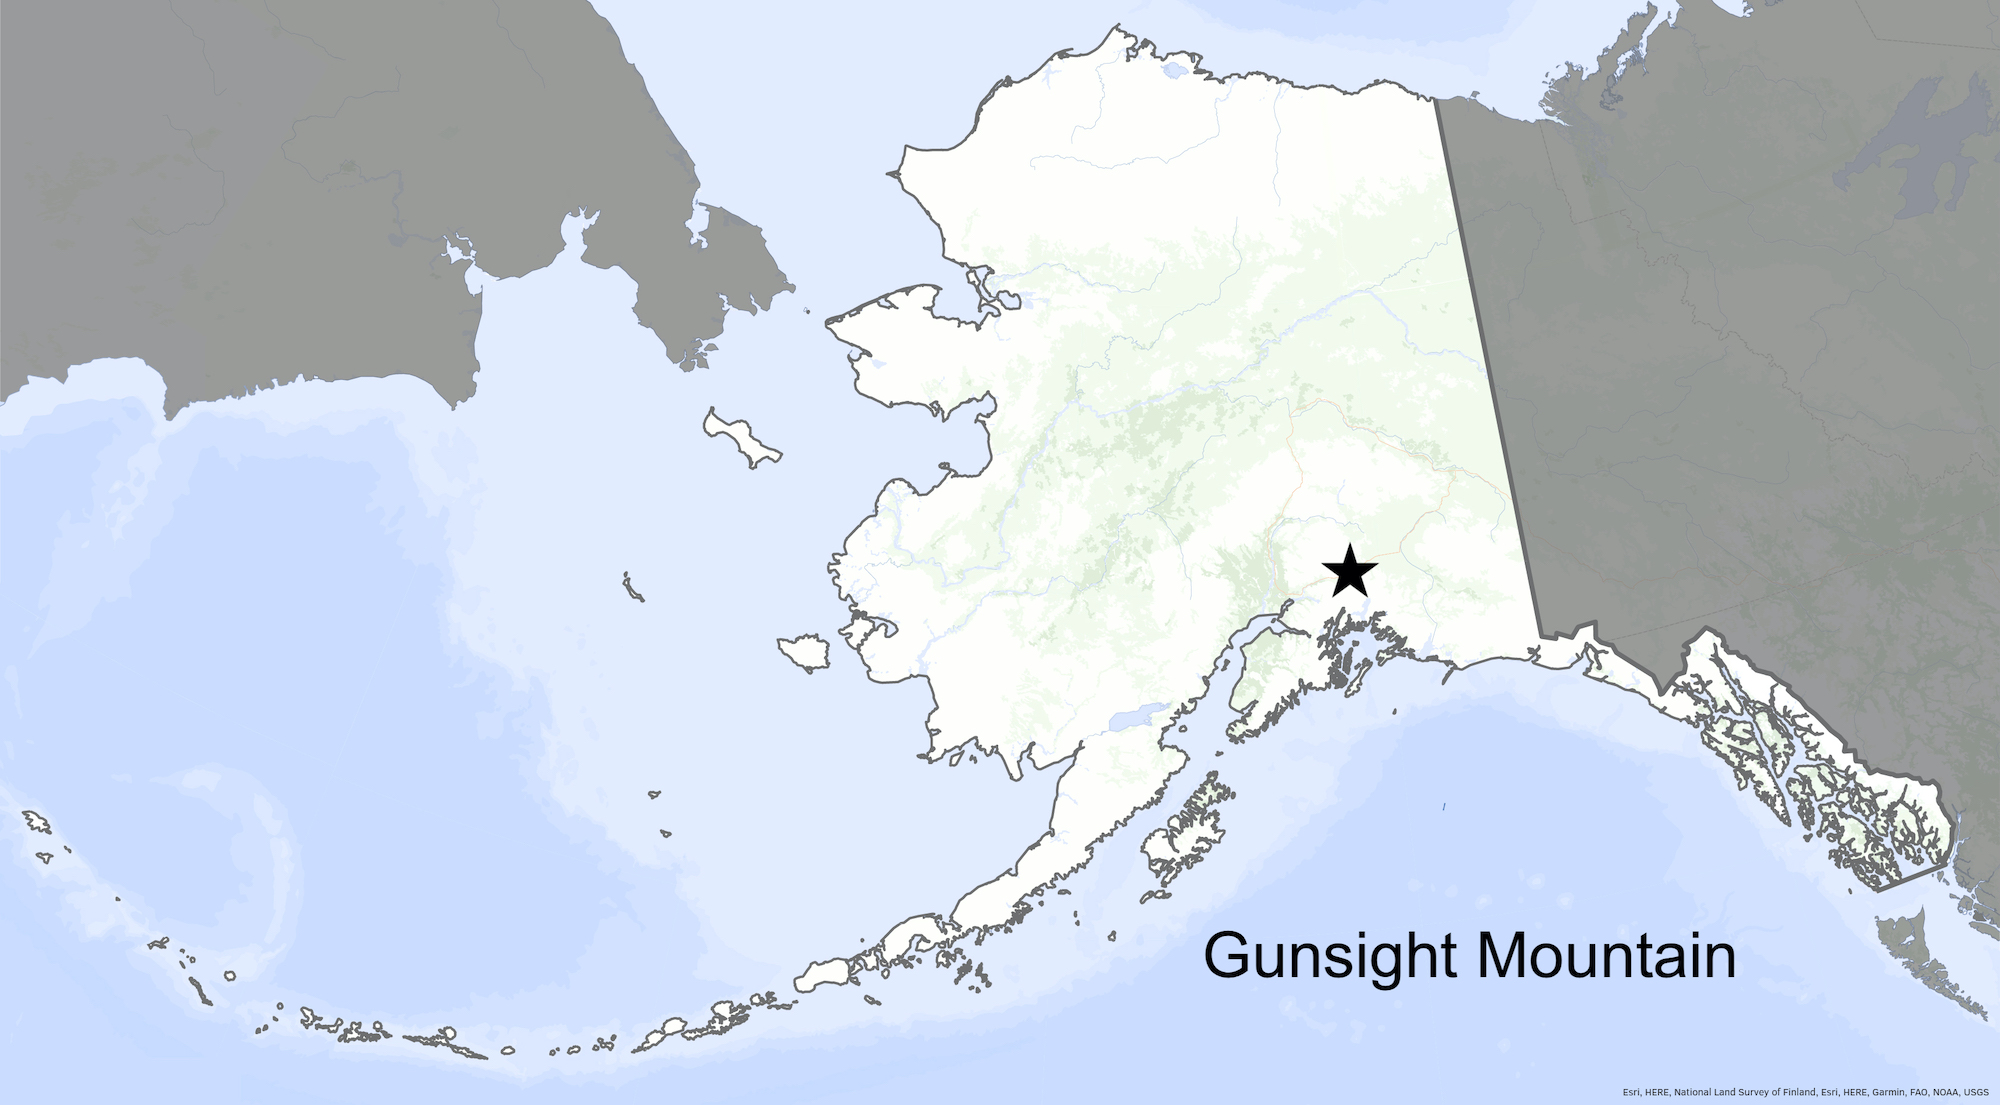 A star on a map marks the location of Gunsight Mountain in Southcentral Alaska between Palmer and Glennallen.